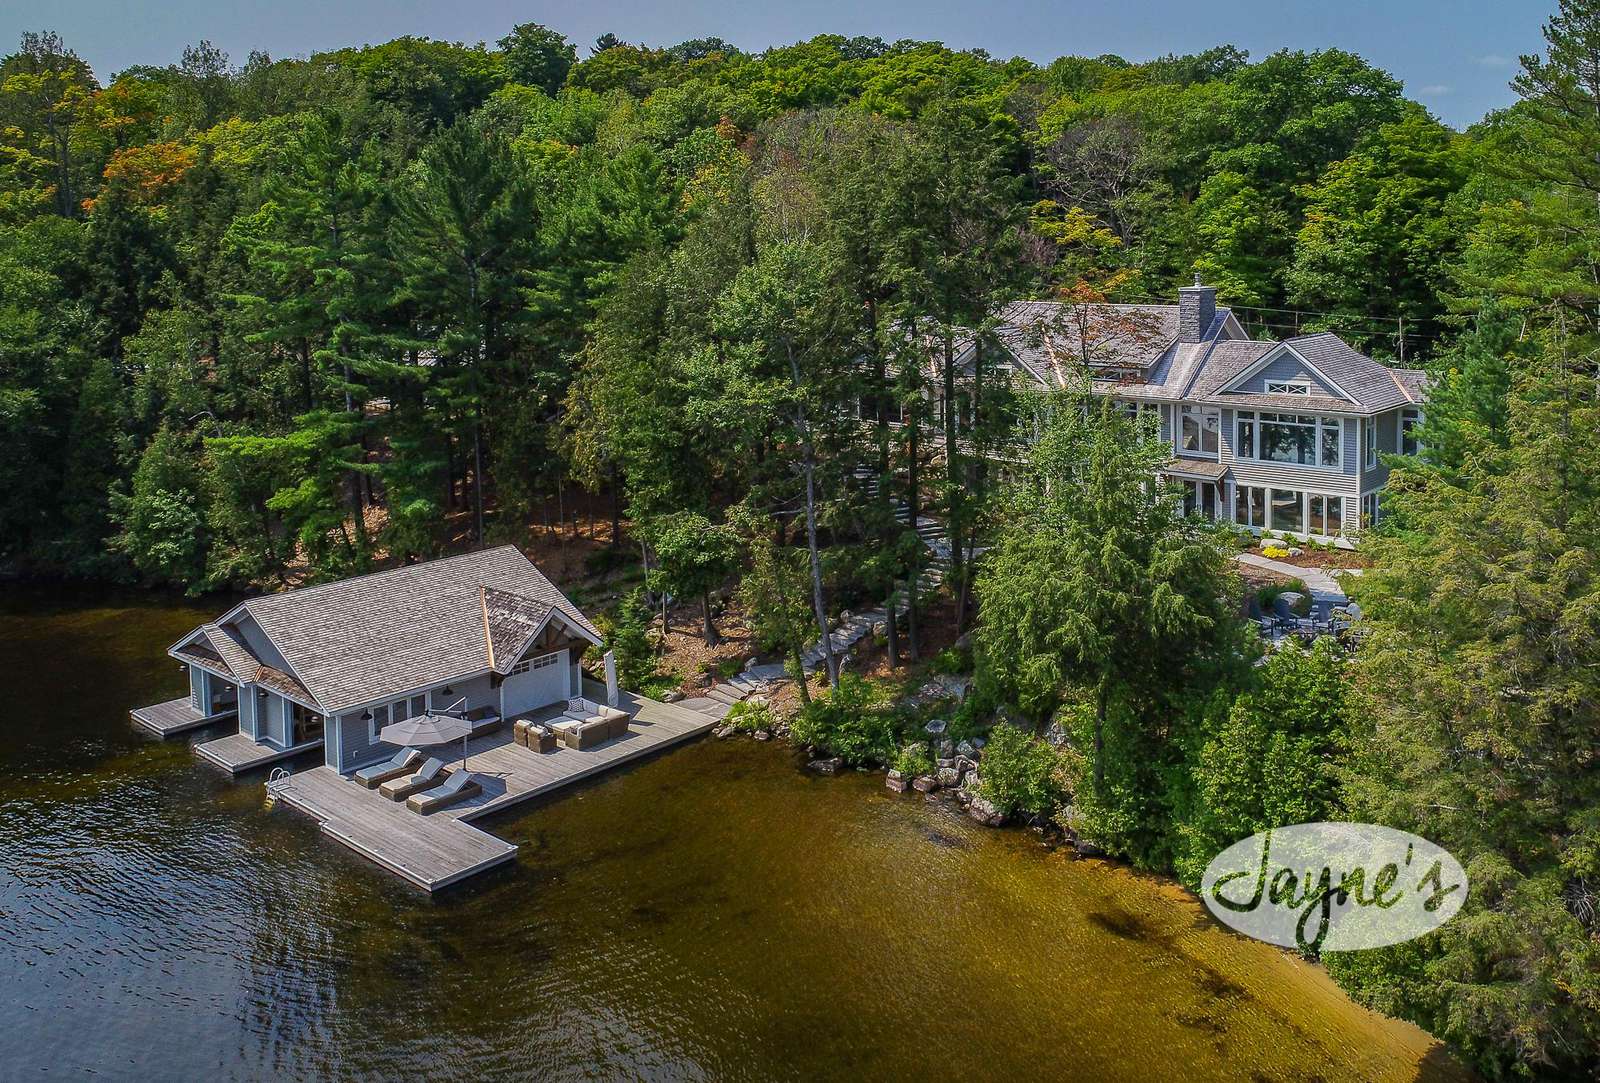 Kismet Cottage on Lake Rosseau - Jayne's Luxurious Rentals | Aerial view showcasing the elegant lakefront property with a private boathouse